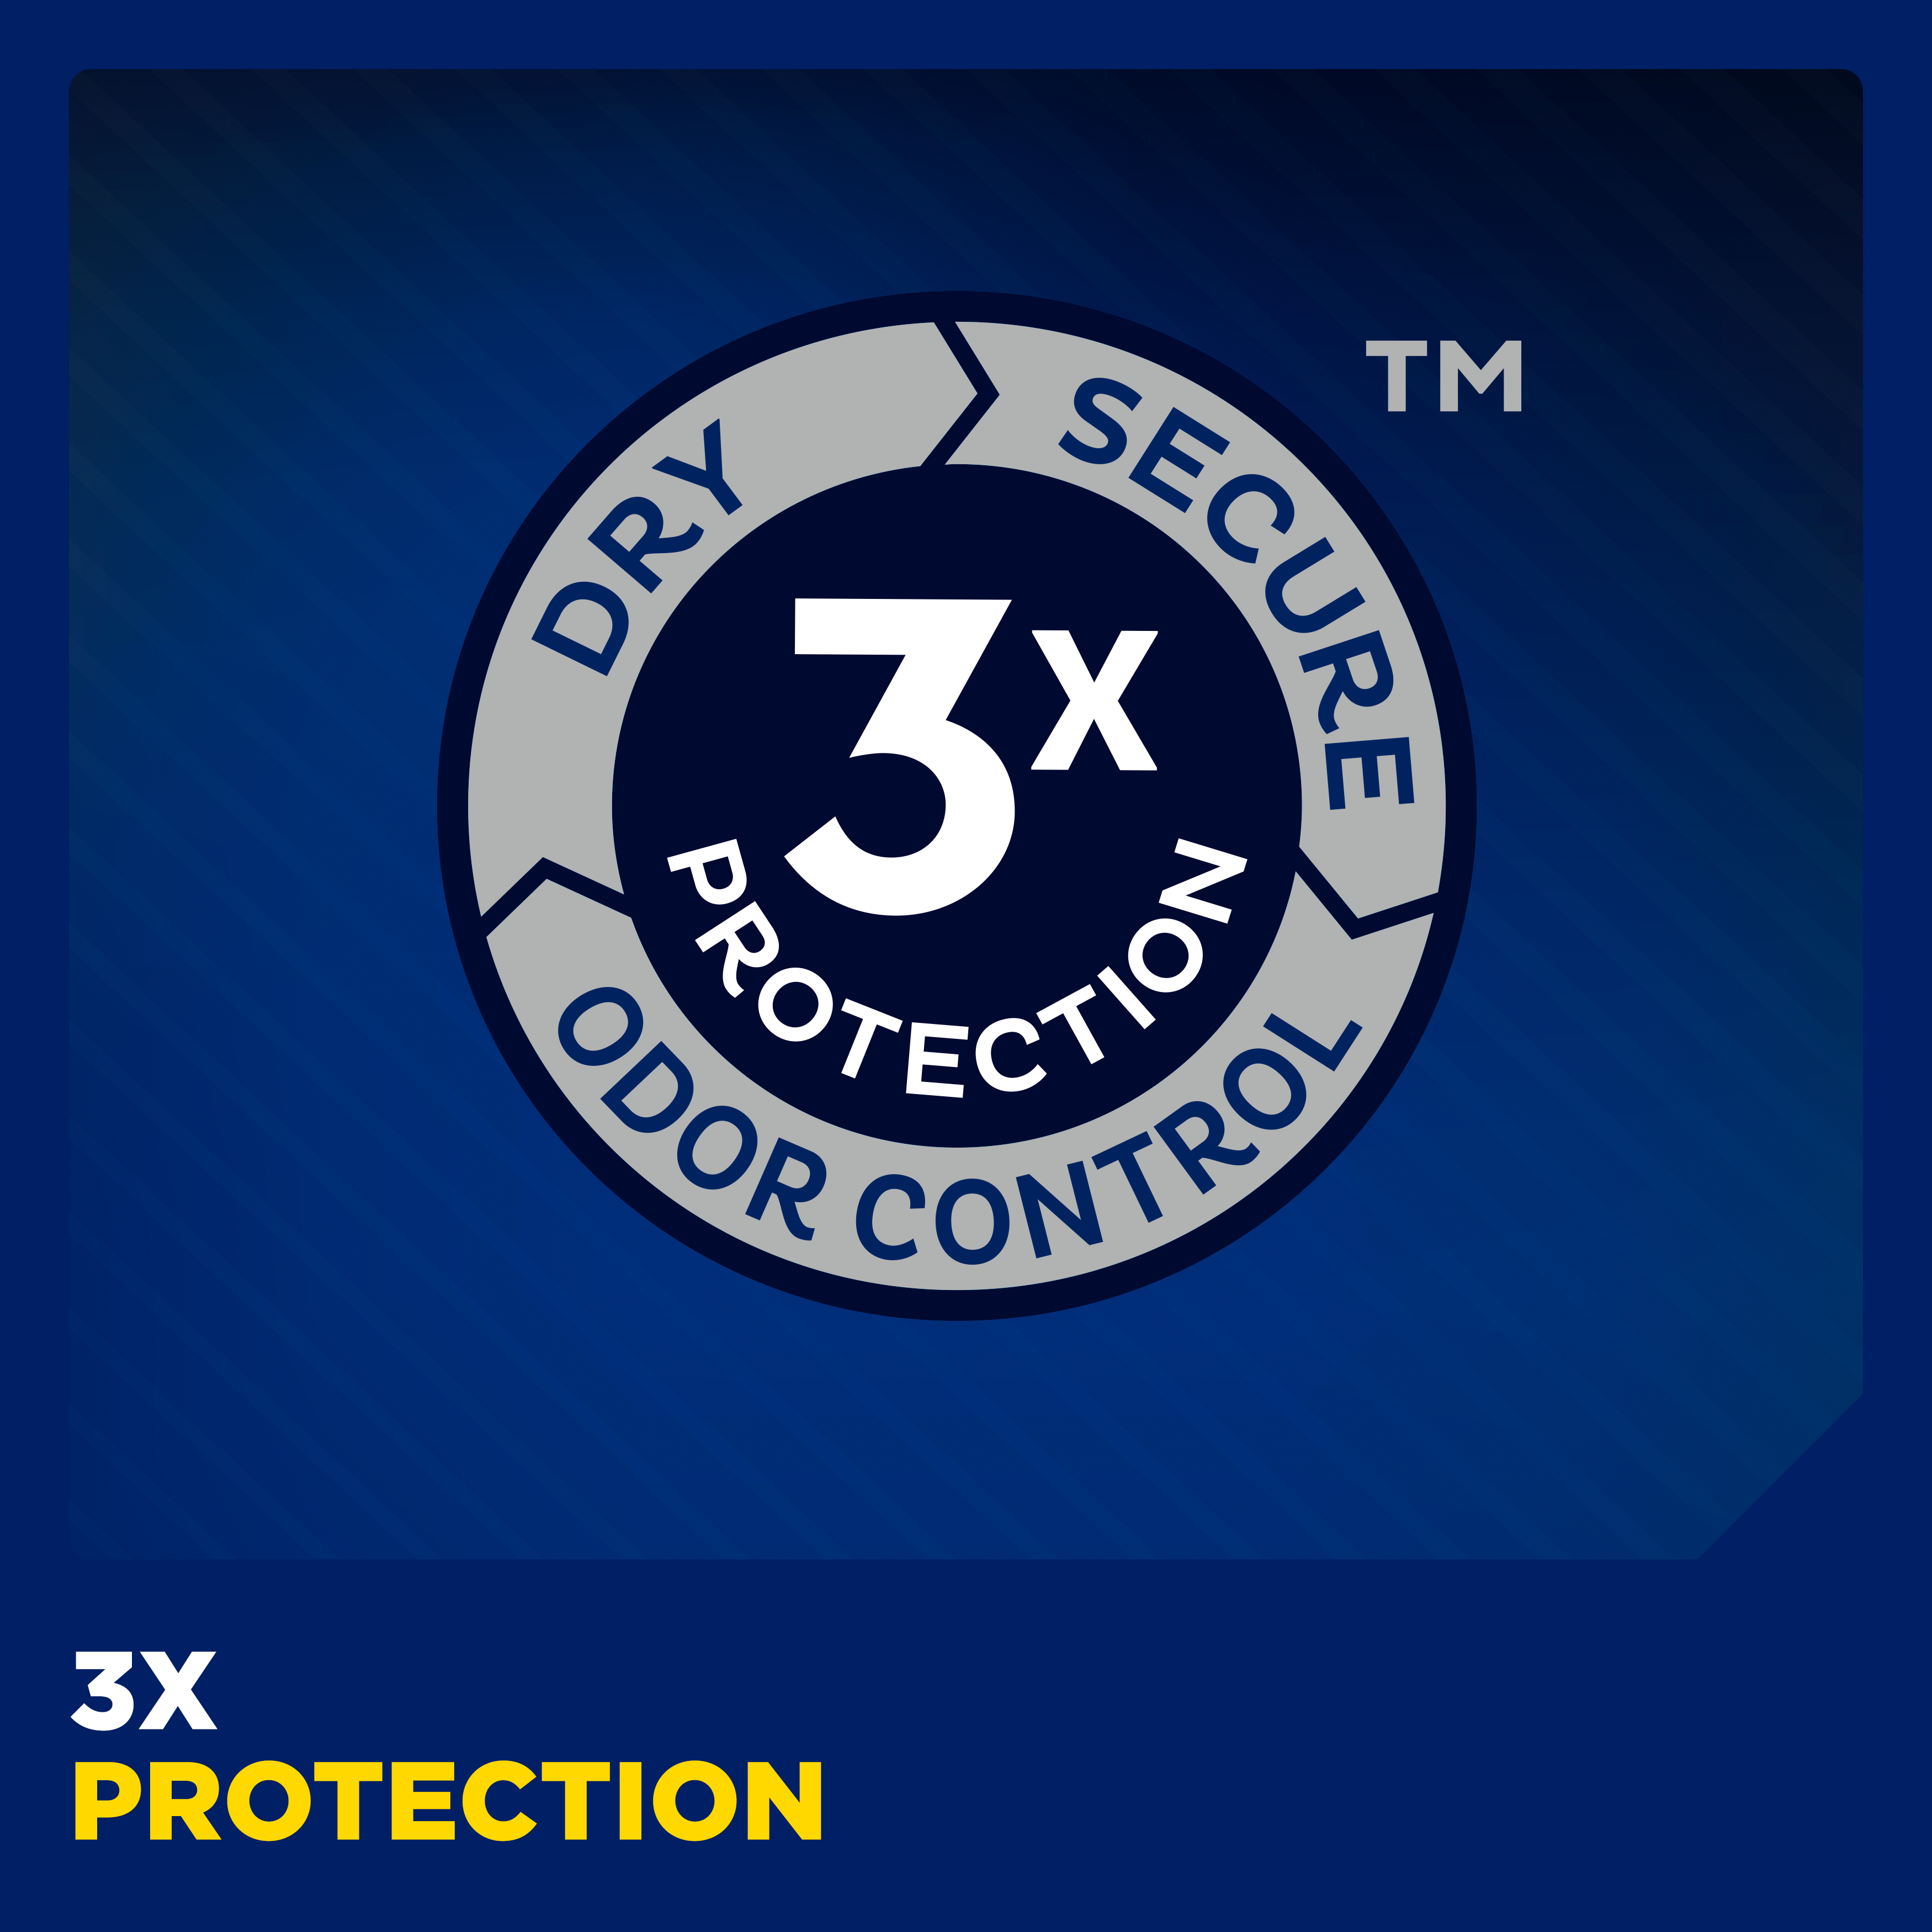 A logo shows the triple protection for underwear